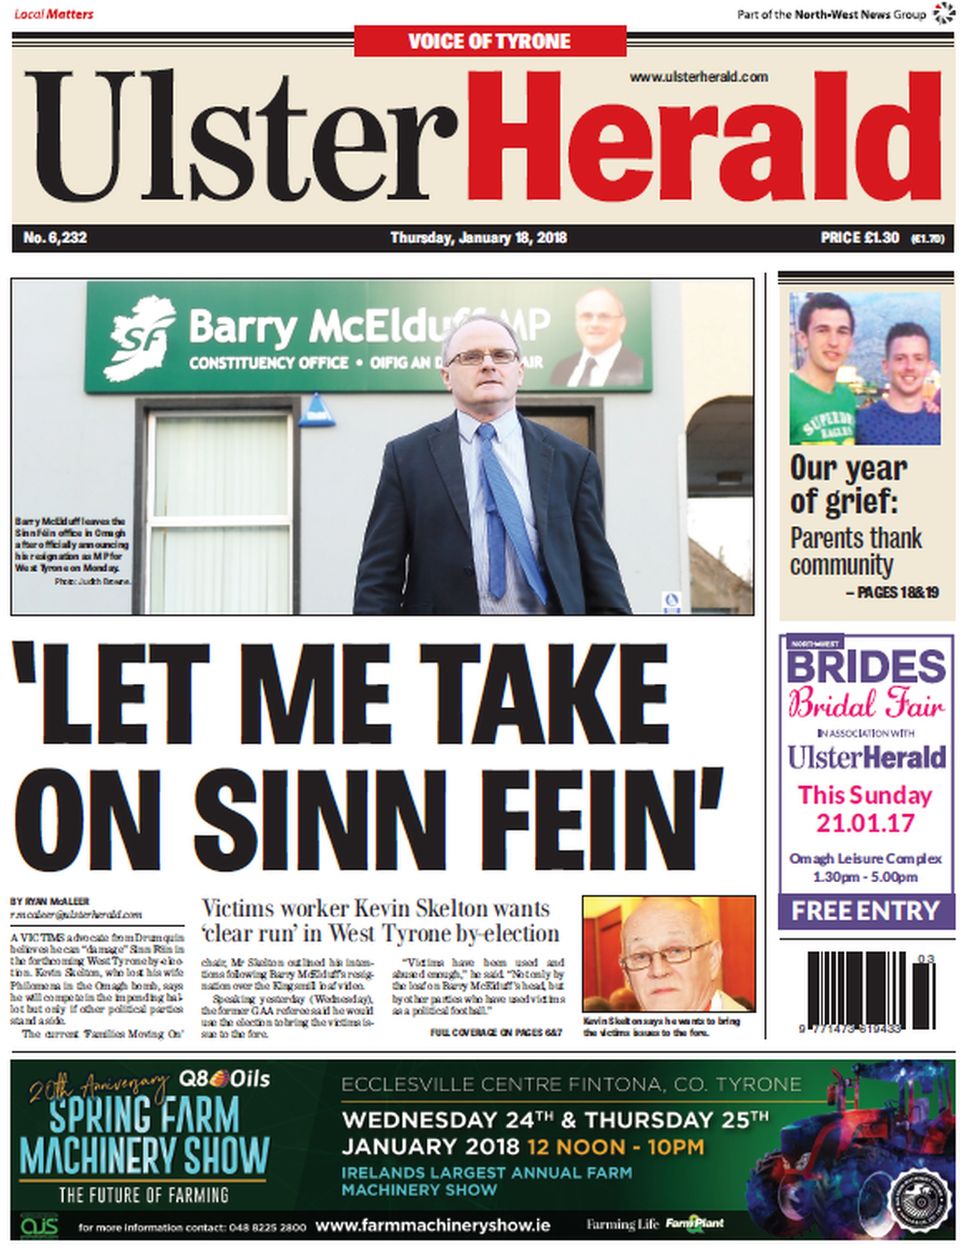 Ulster Herald front page